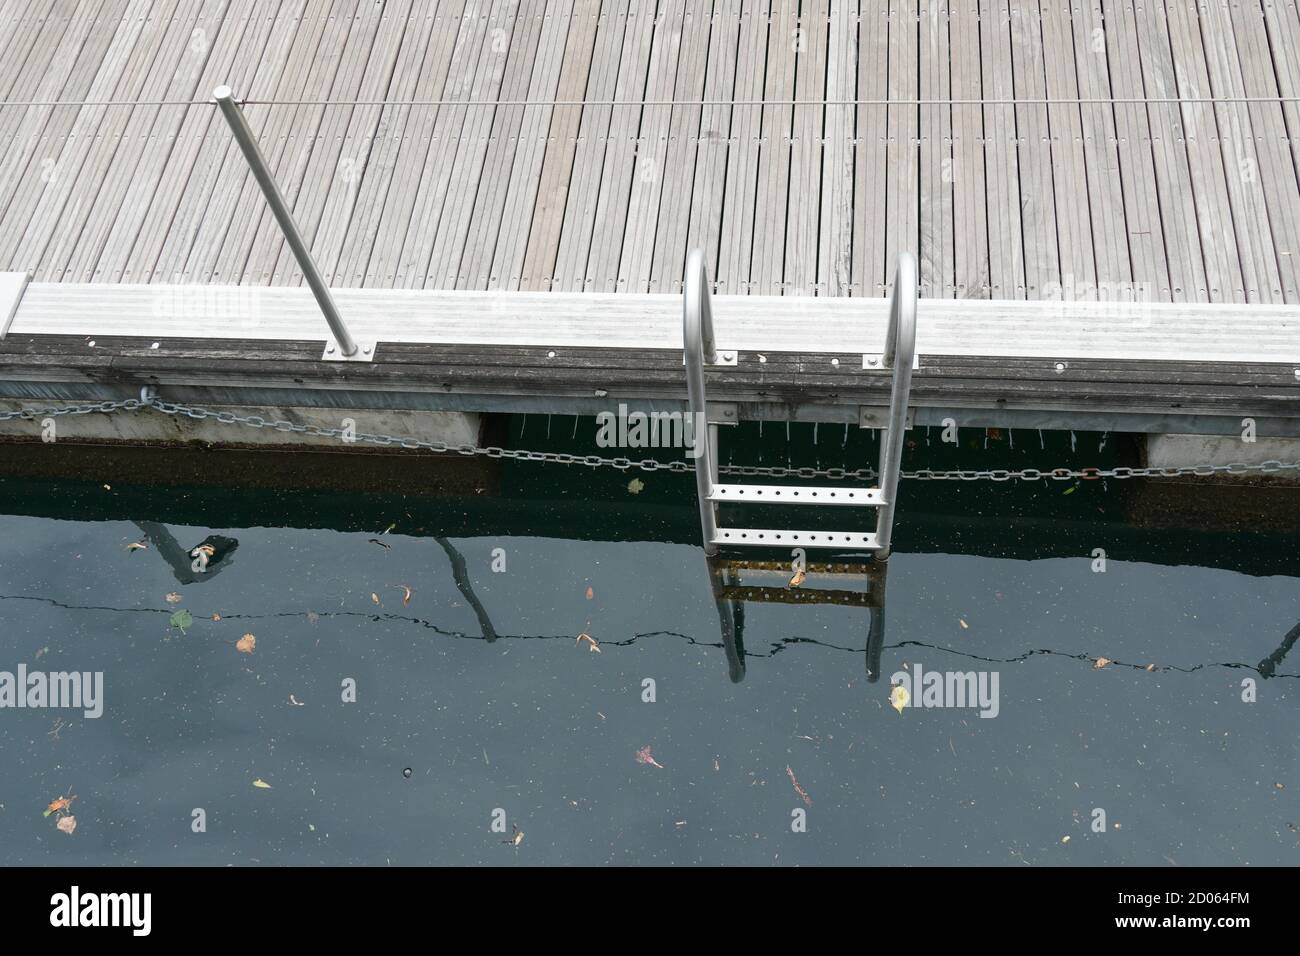 Metal ladder for descending into the water in marina in Locarno, Switzerland. The ladder reflects in the water and the reflection makes it seem longer Stock Photo